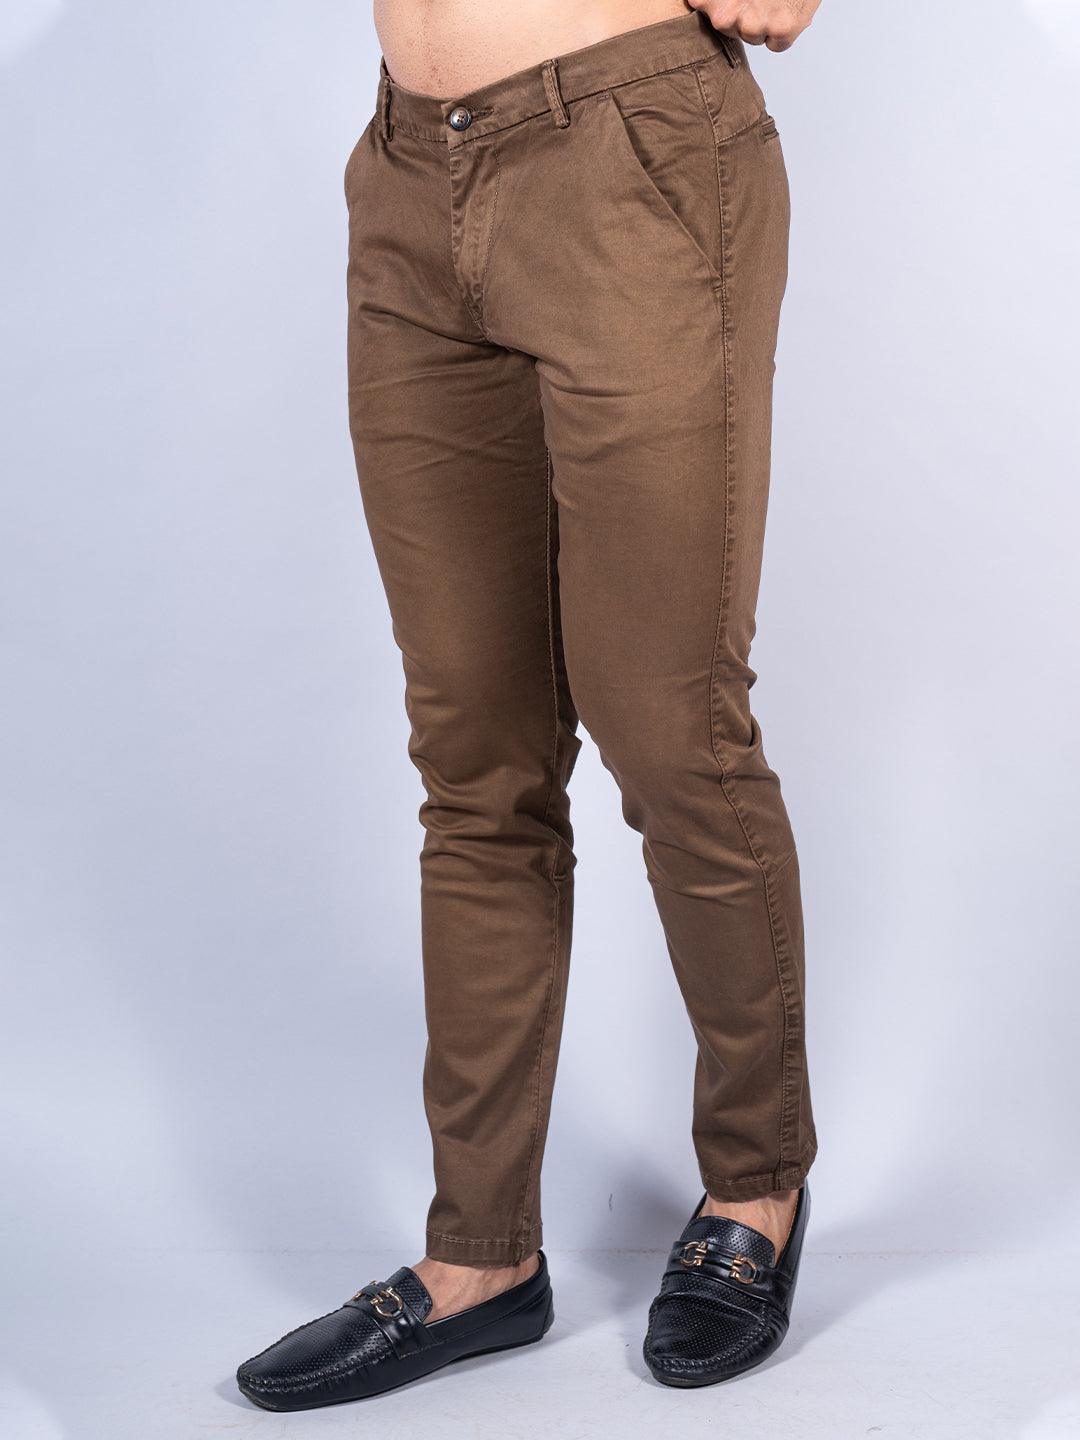 Men's Chinos | Cuffed, Skinny & Tapered Chino Pants | Connor